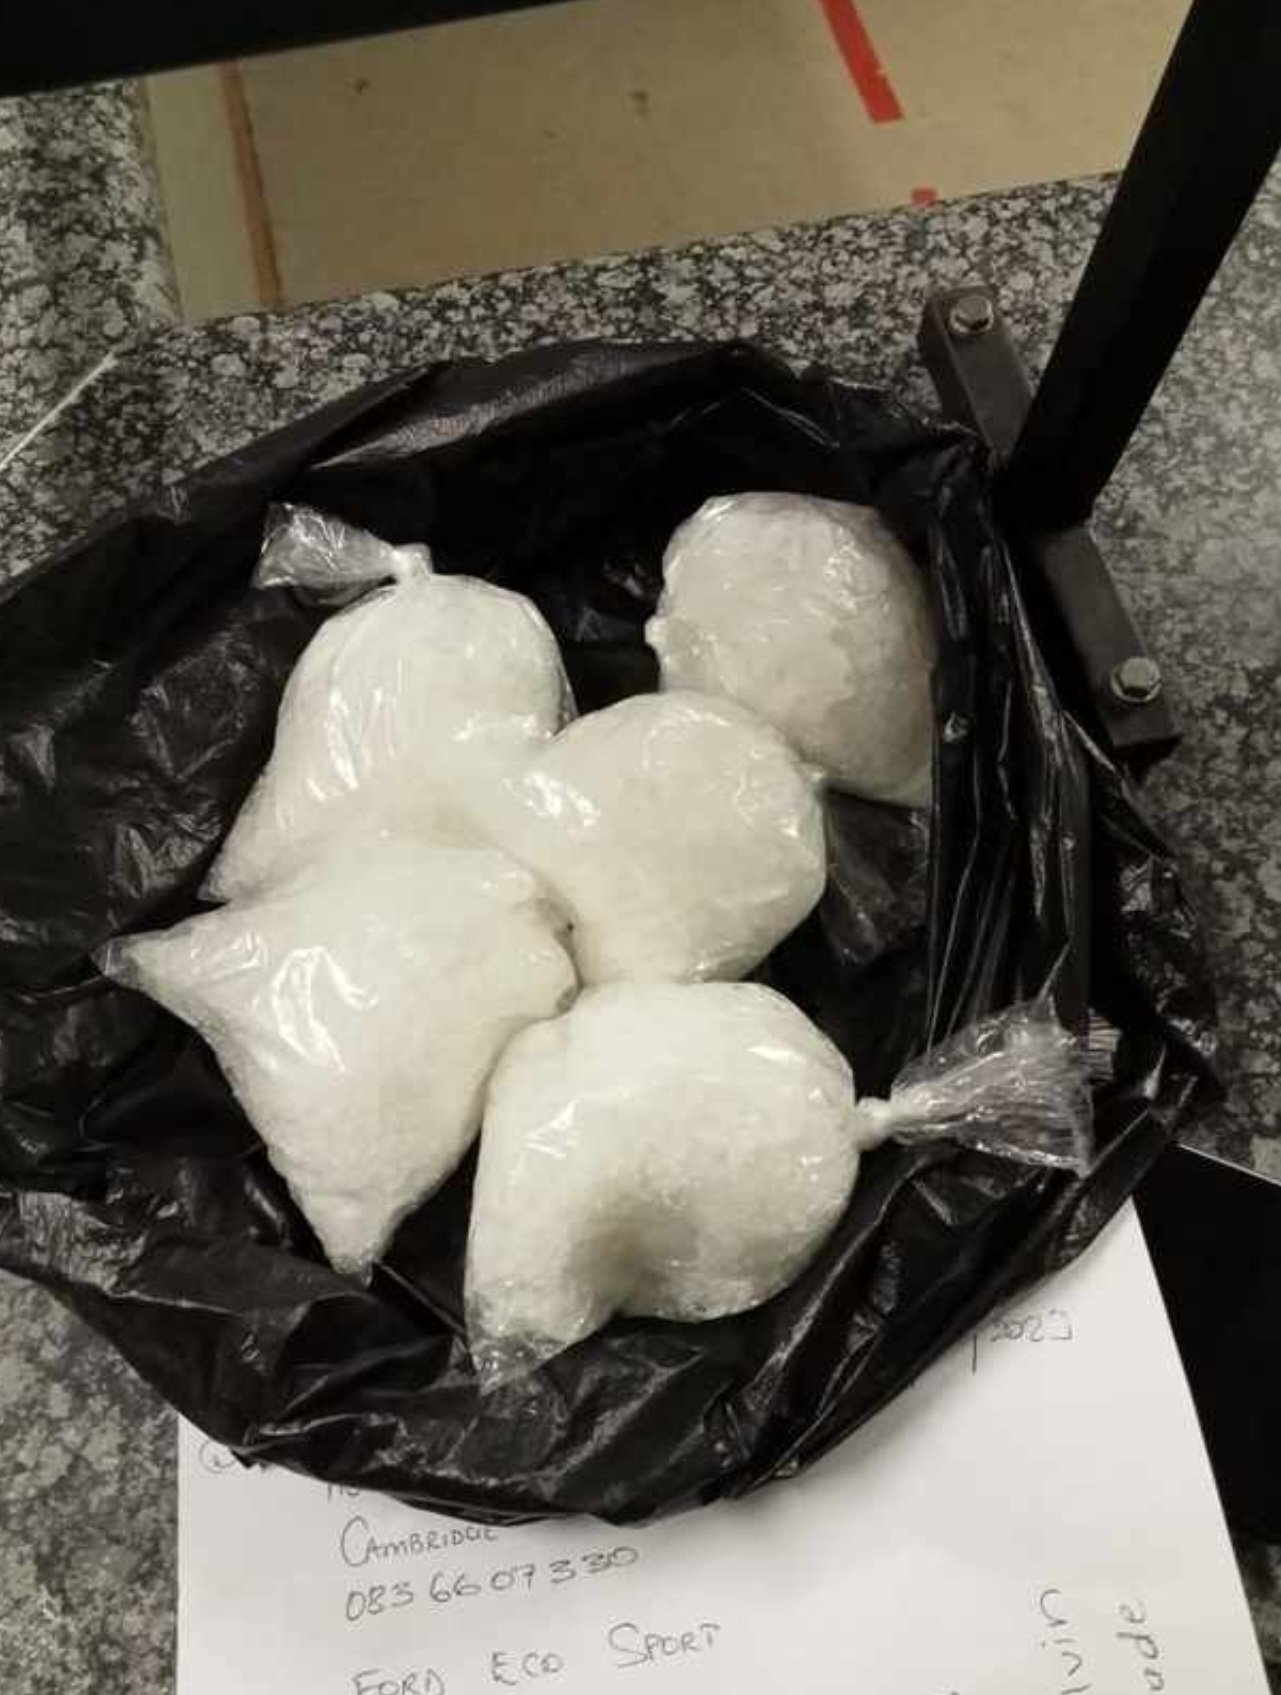 27-year-old woman and her Nigerian boyfriend arrested with drugs in South Africa